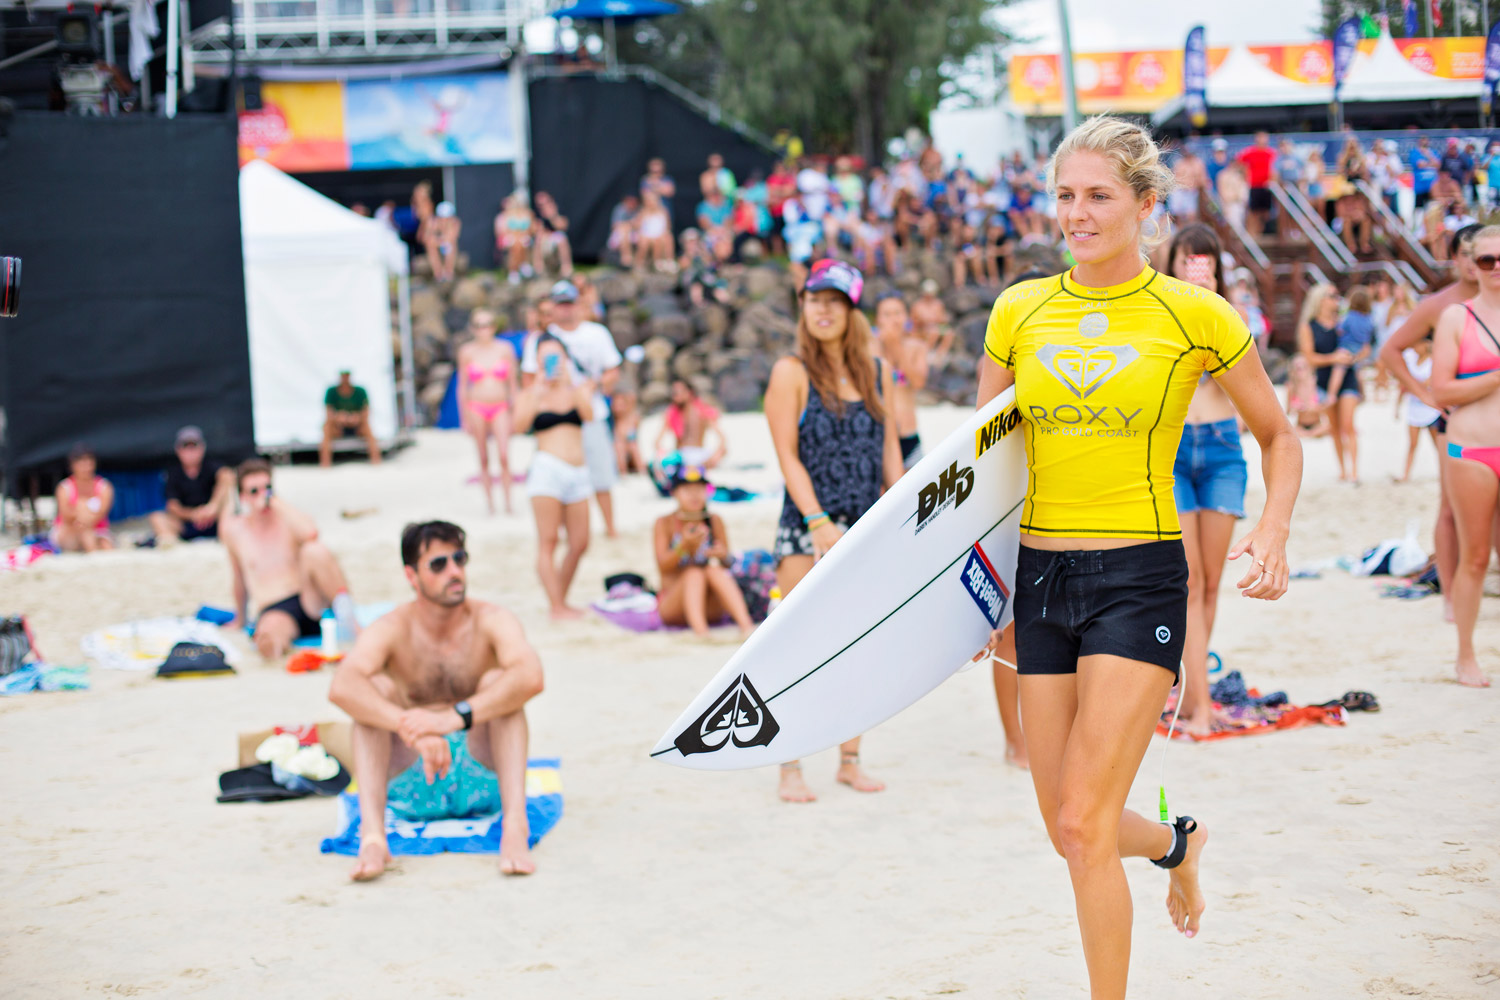 Day 7 at the ROXYpro